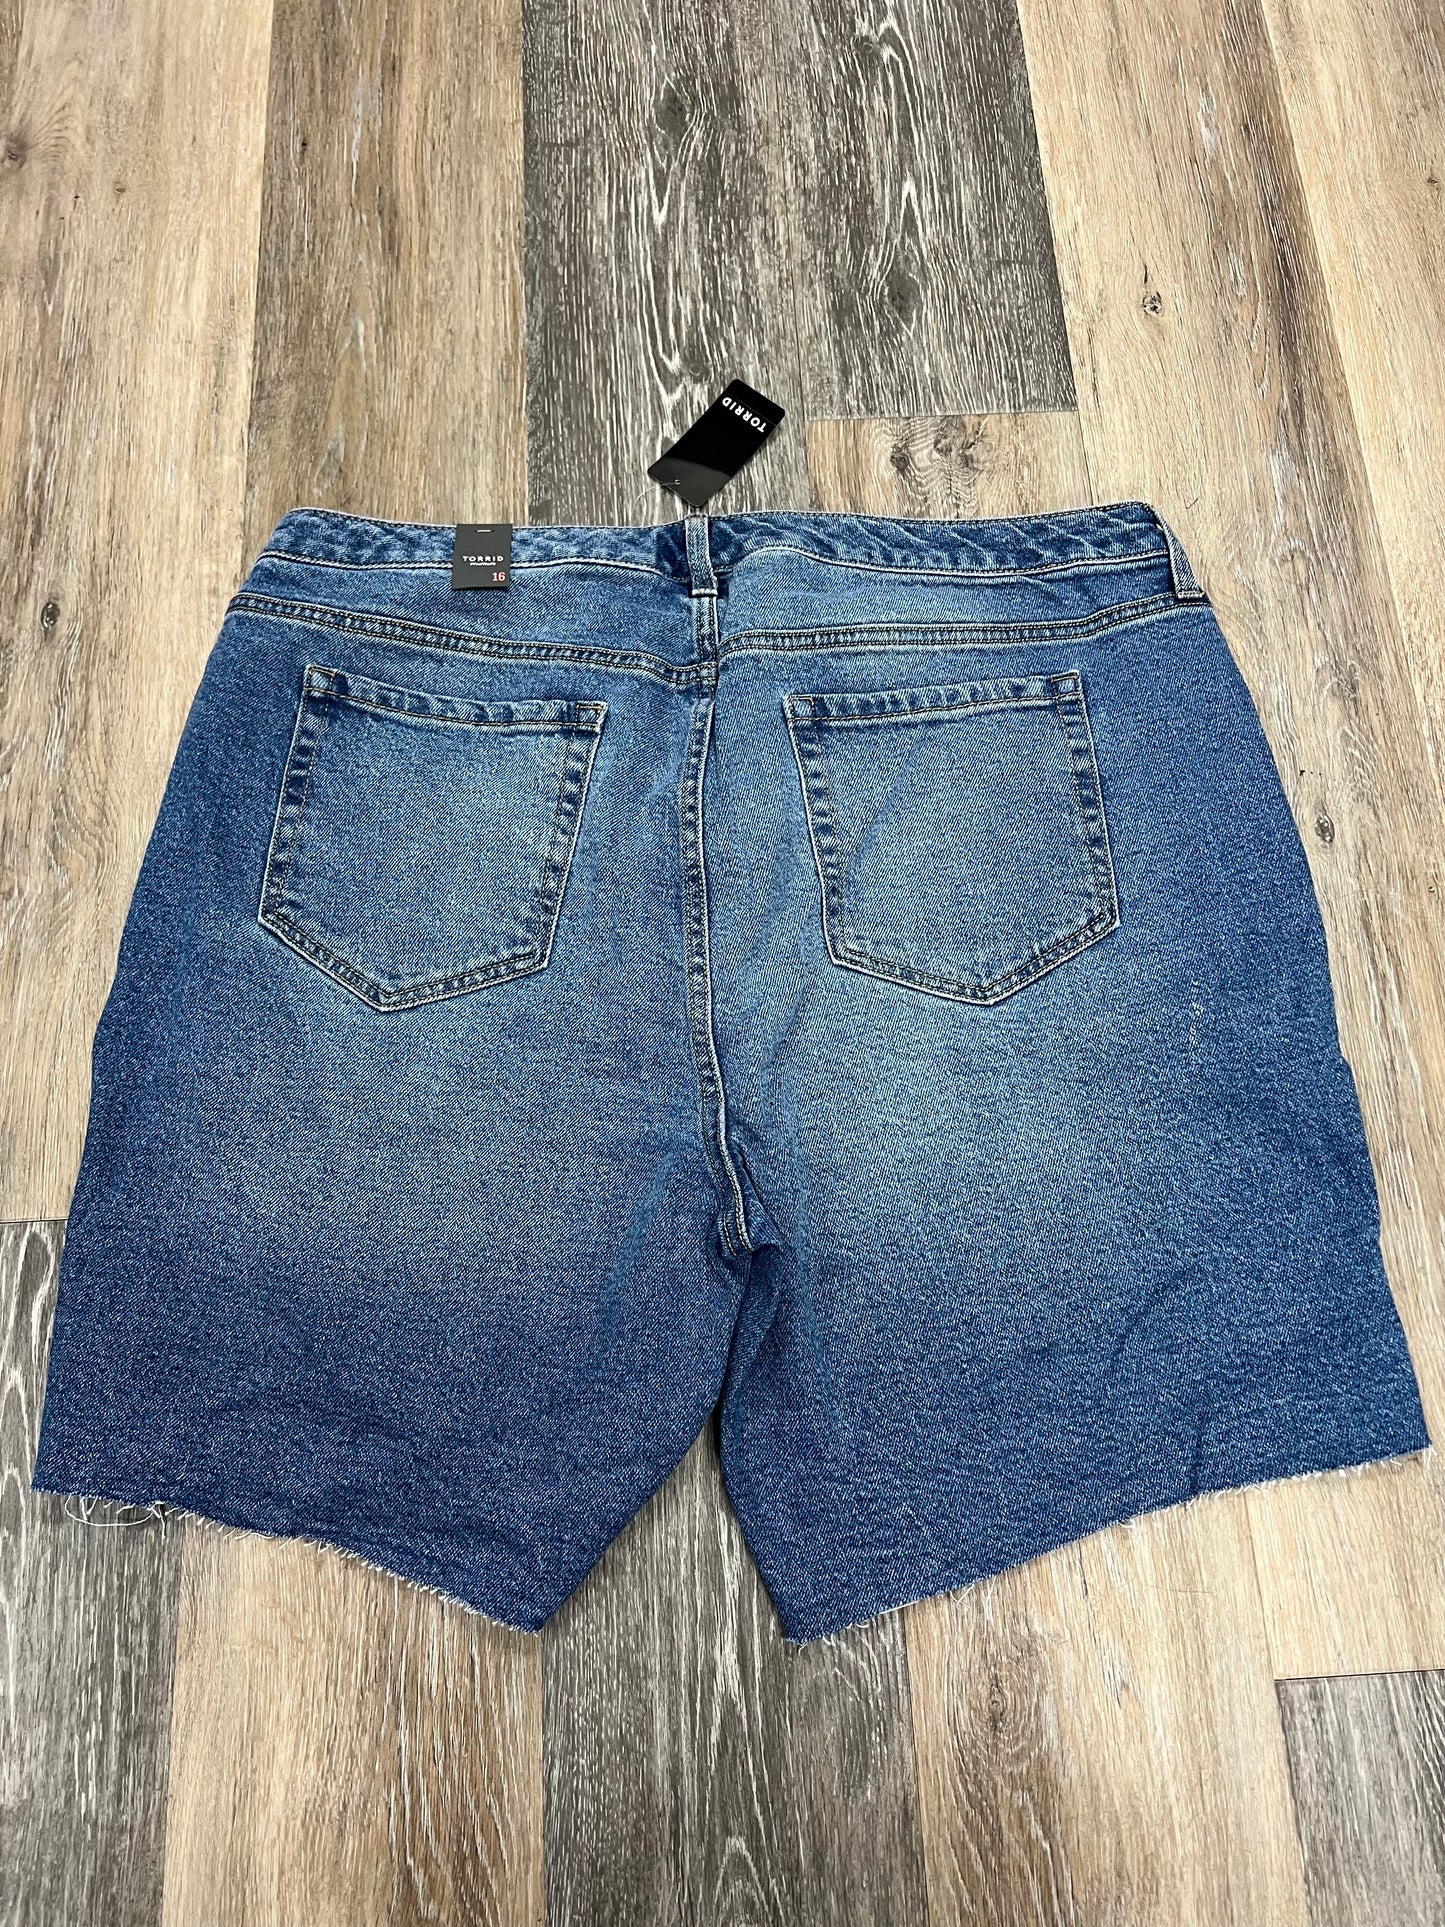 Shorts By Torrid  Size: 16